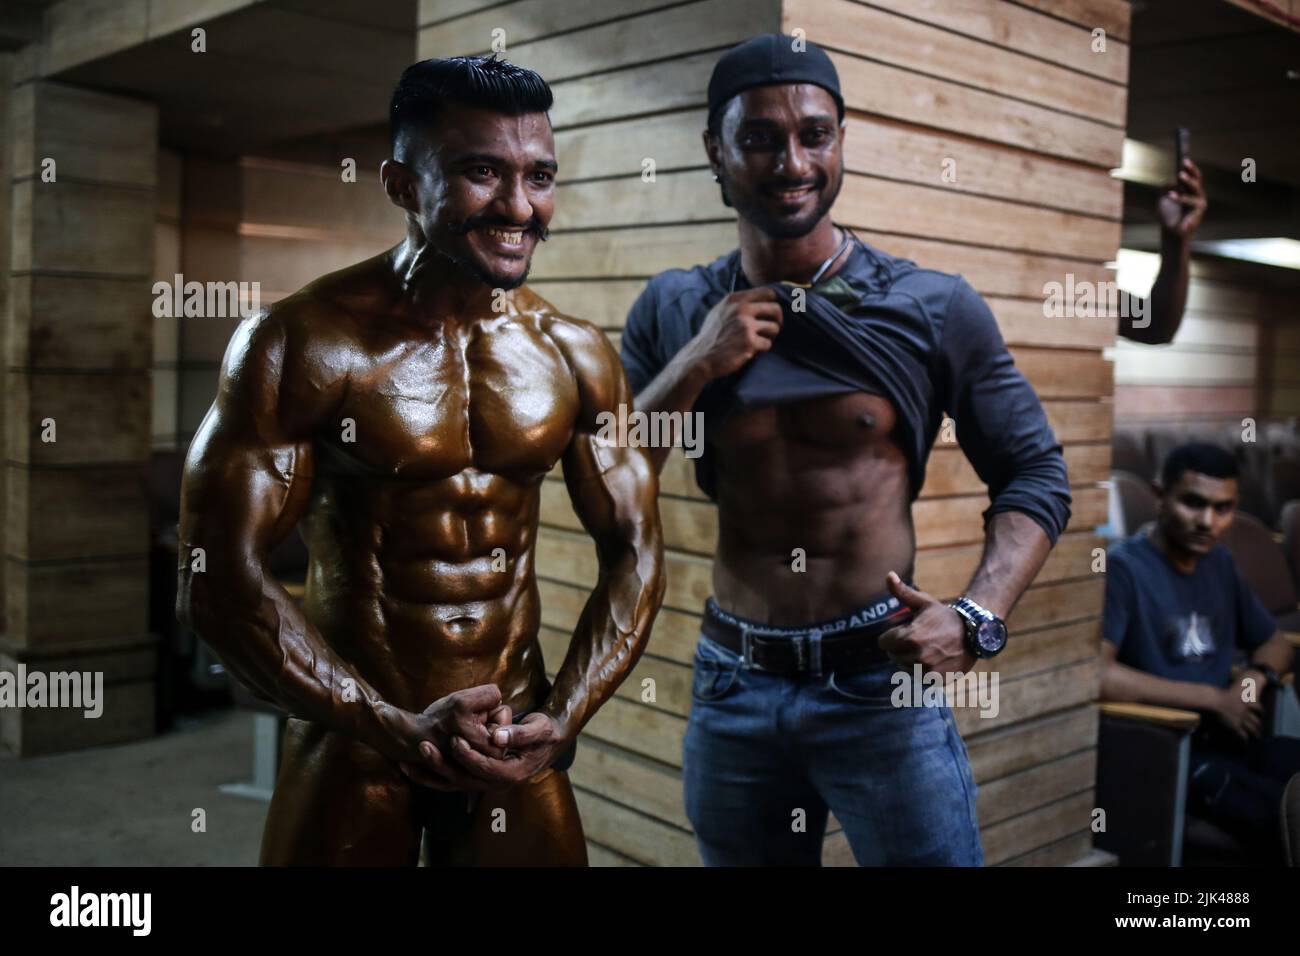 Dhaka, Bangladesh. 30th July, 2022. Mr. Dhaka Open Bodybuilding  Championship game has started in 11 weight classes in three categories  Organized by Bangladesh Bodybuilding Federation. The competition has 60,  65, 70, 75